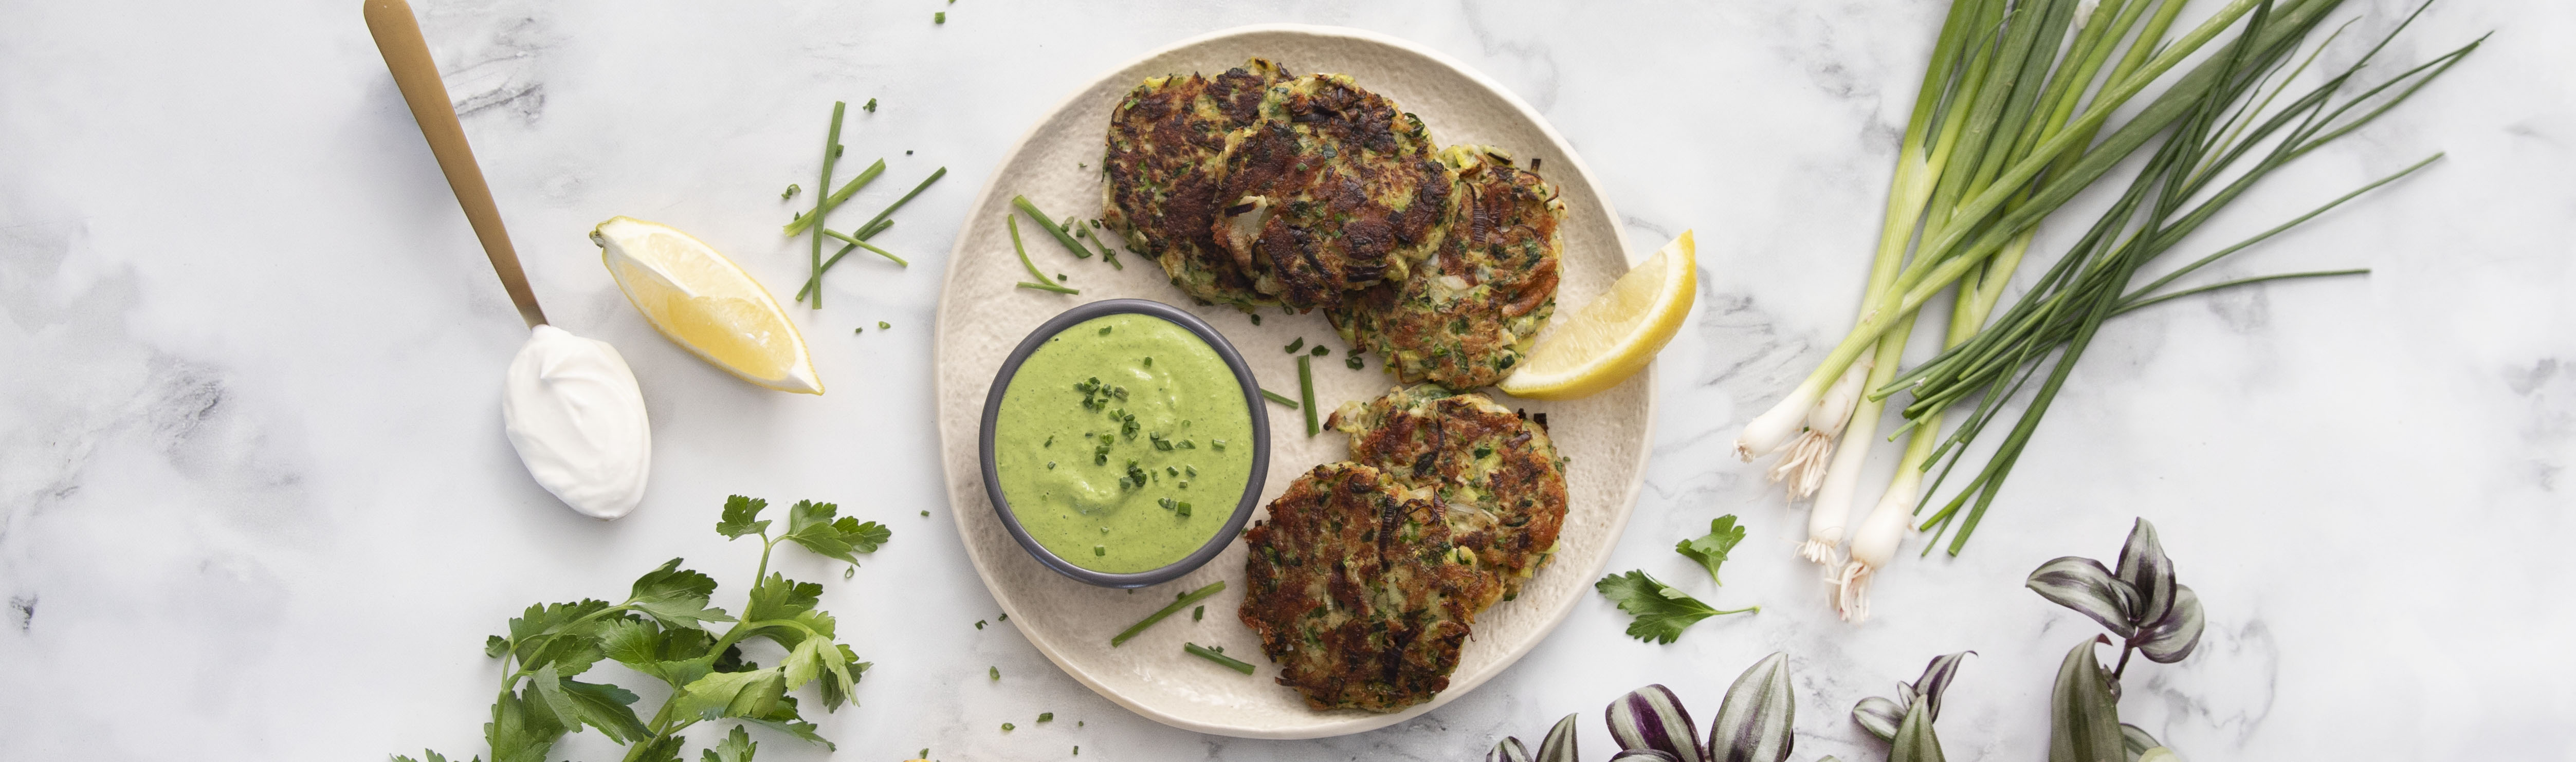 Courgette-Cheddar Fritters